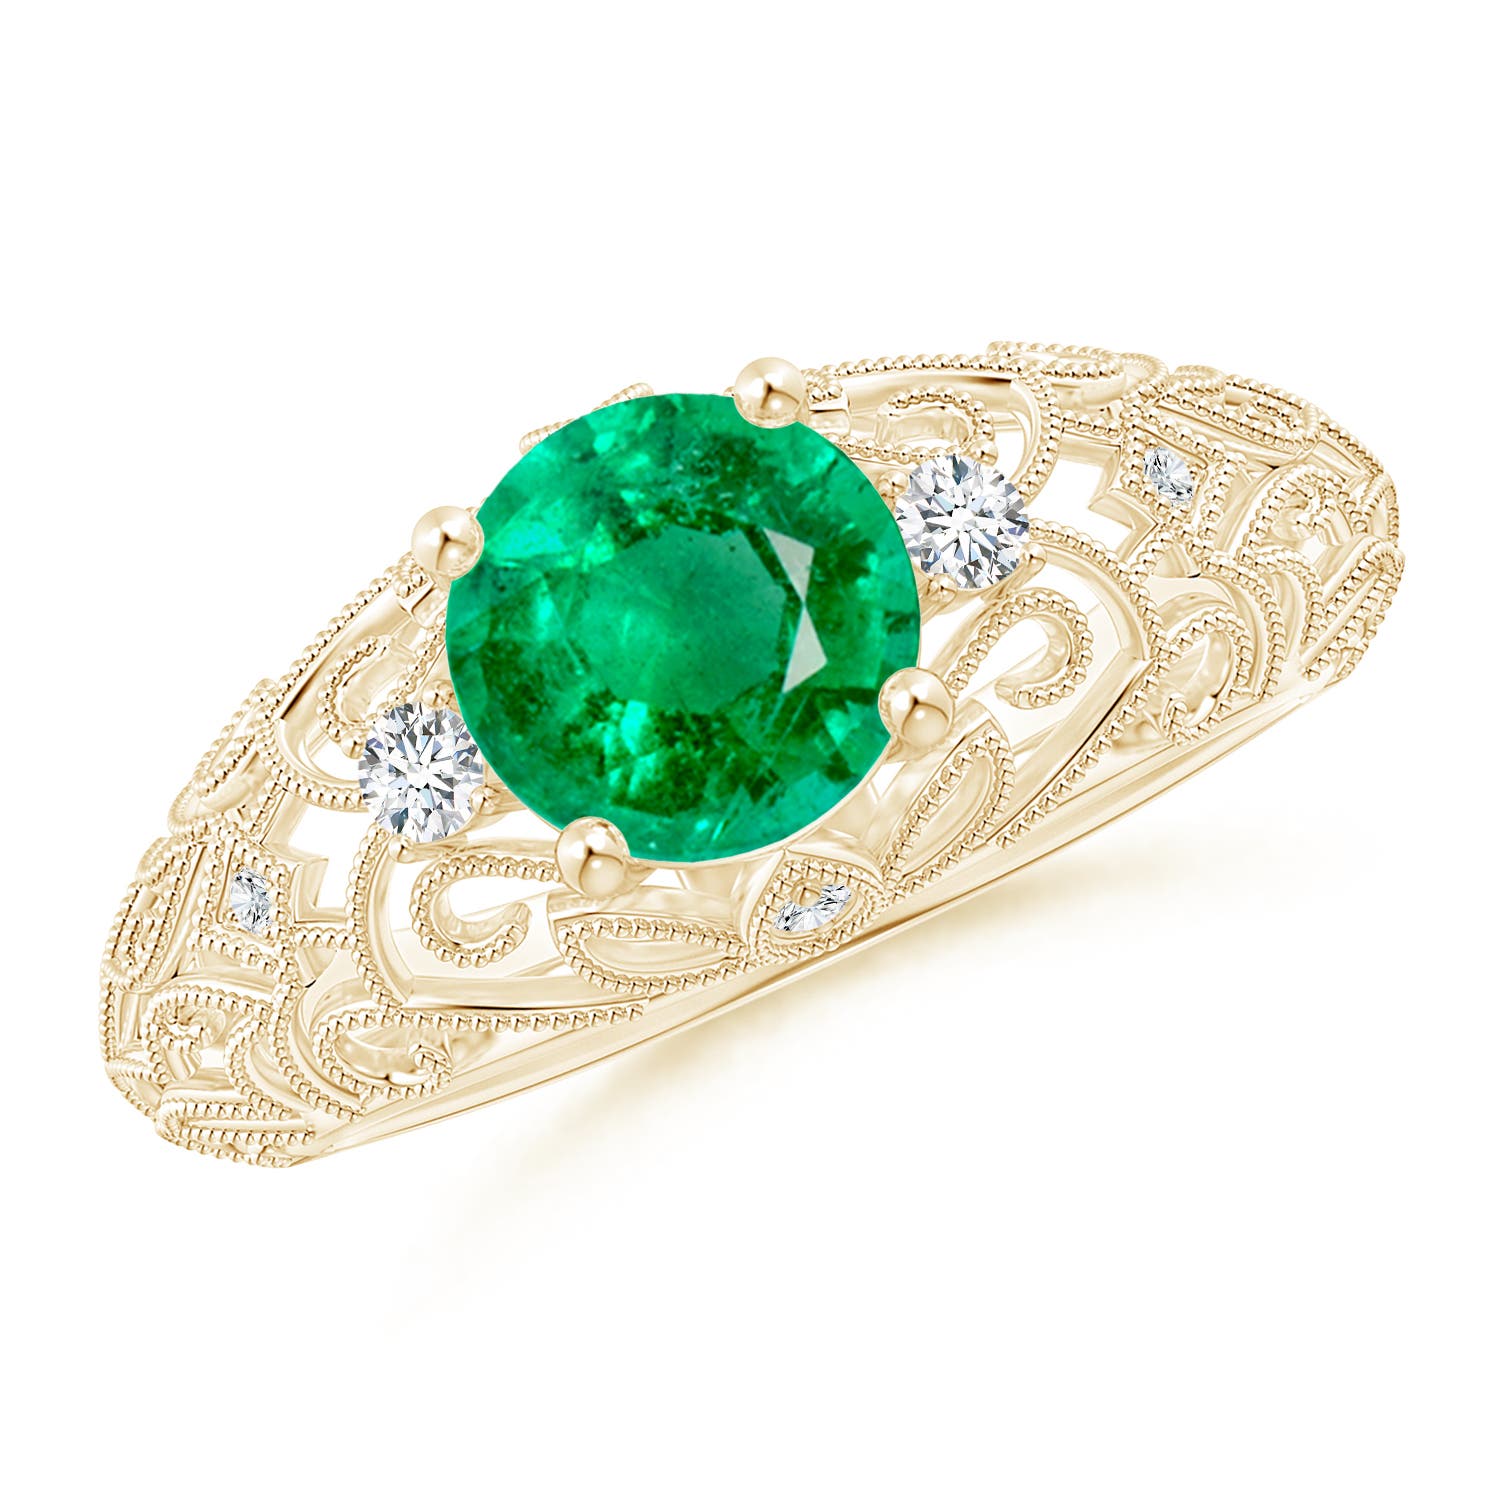 AAA - Emerald / 1.3 CT / 14 KT Yellow Gold